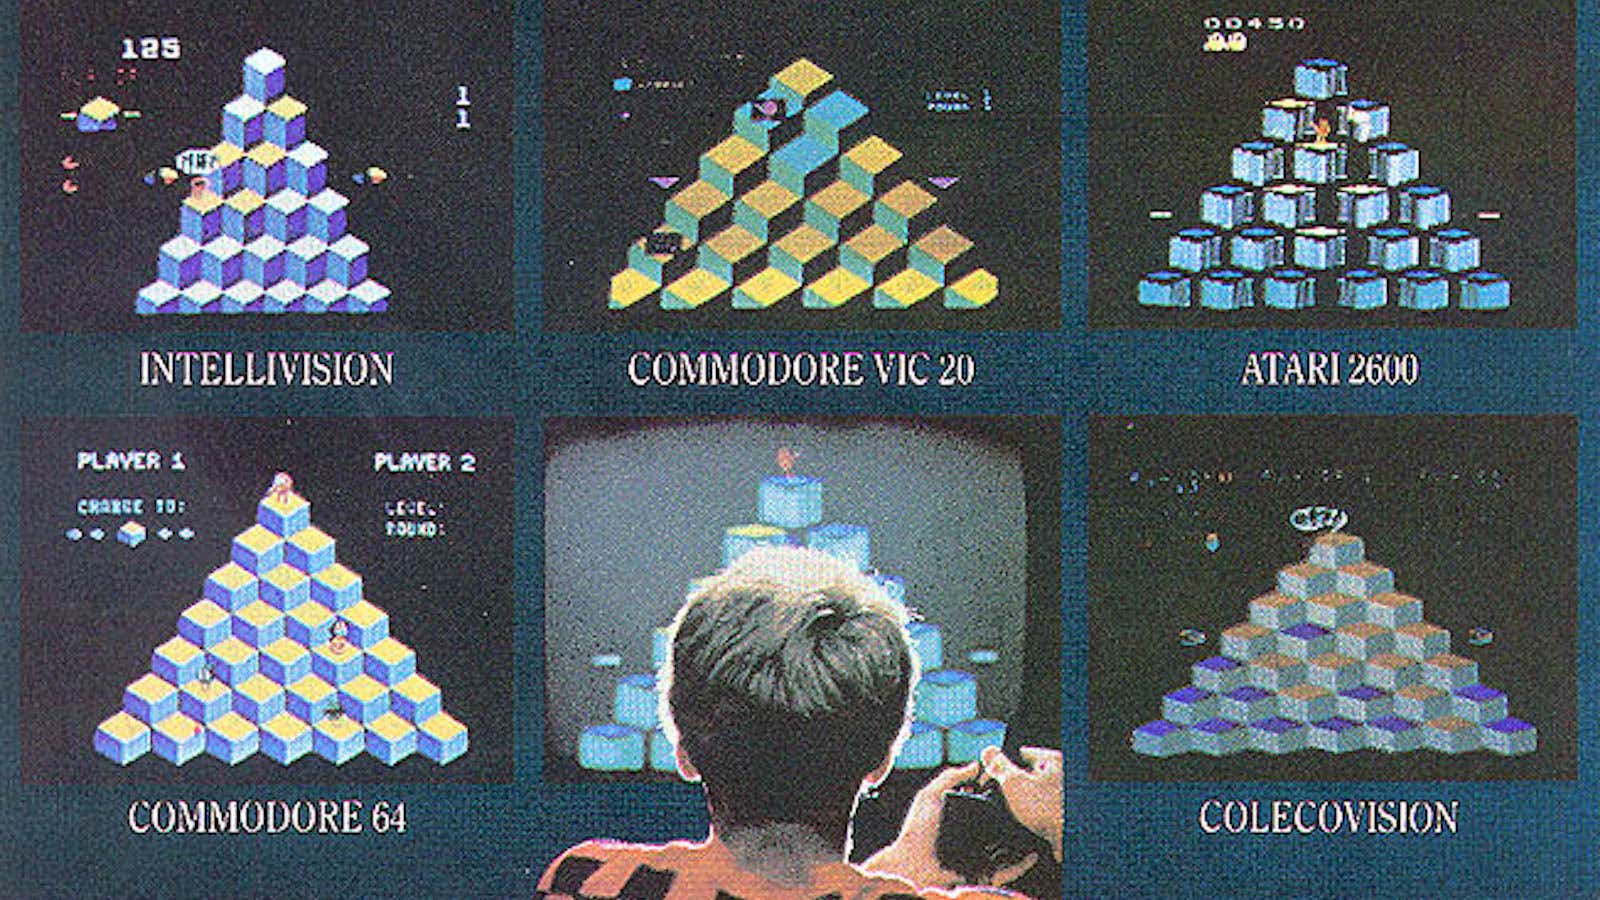 A vintage 1983 video-game ad for Q*Bert